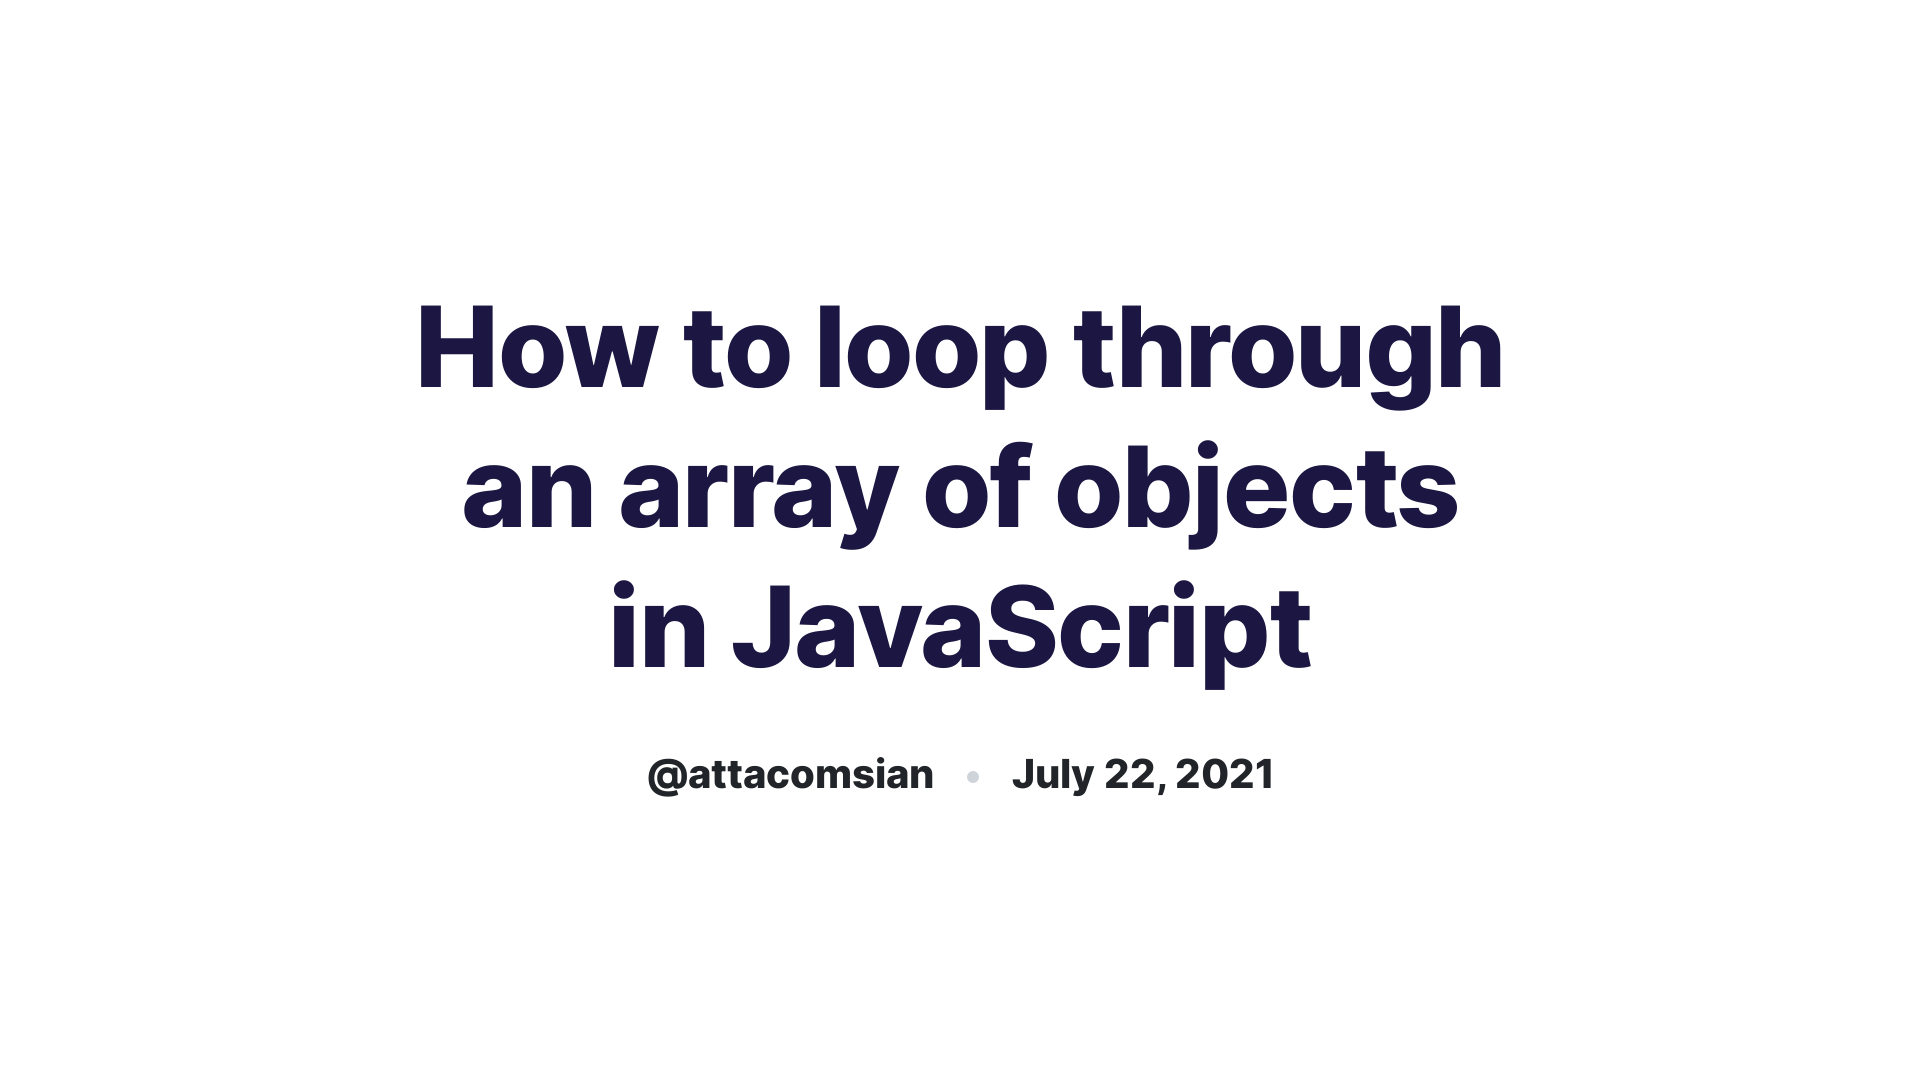 How to loop through an array of objects in JavaScript